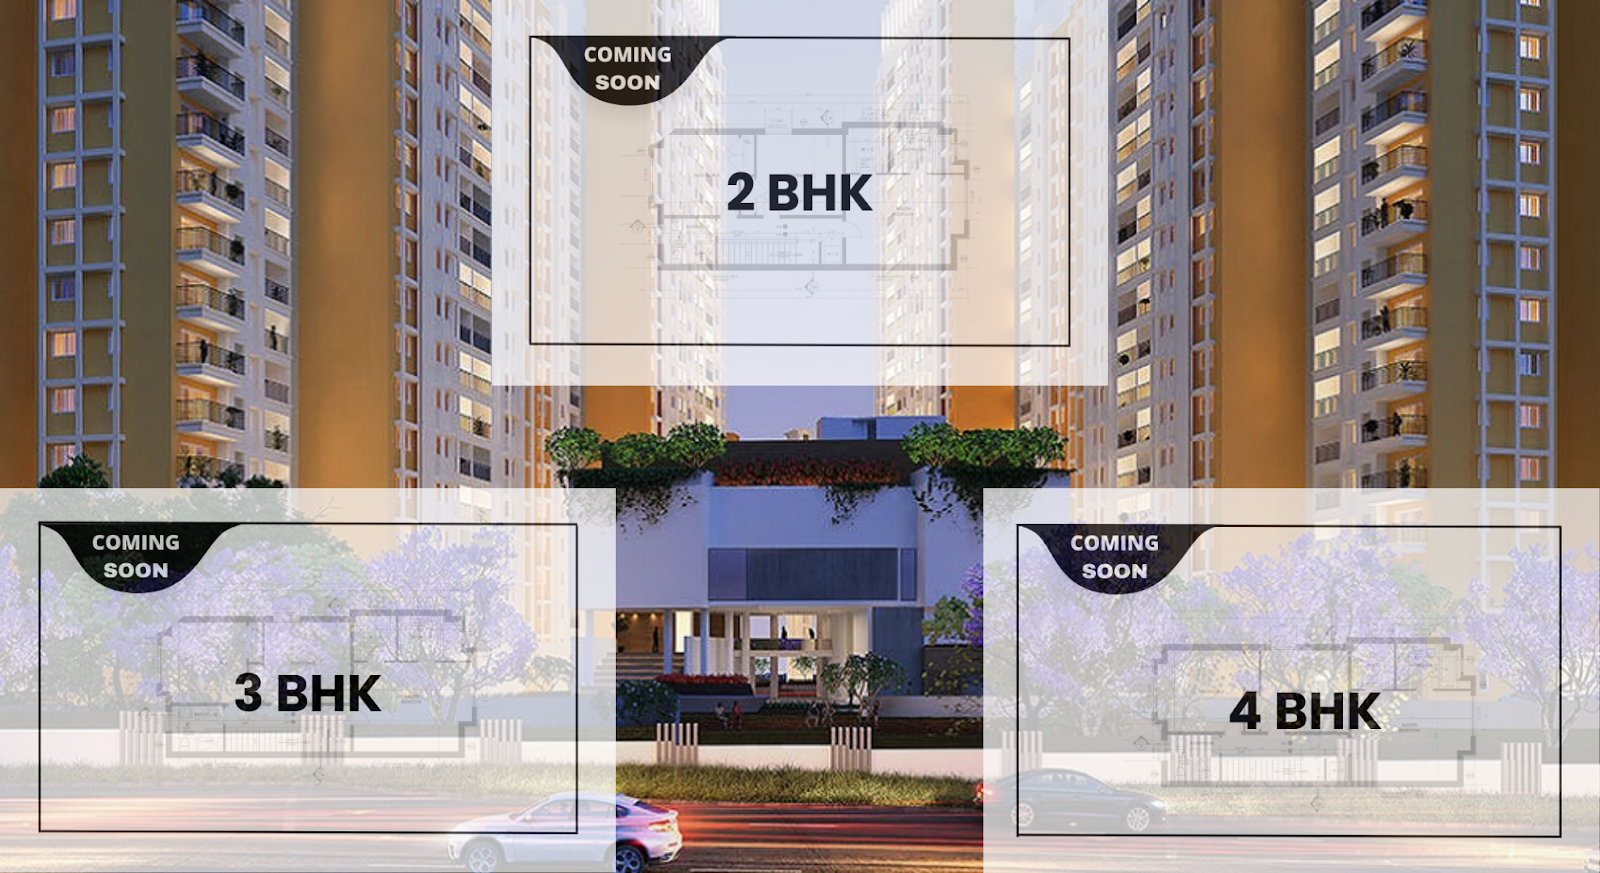 Bengal Lamps offers luxurious 2, 3, and 4 BHK apartments with over 30 amenities.